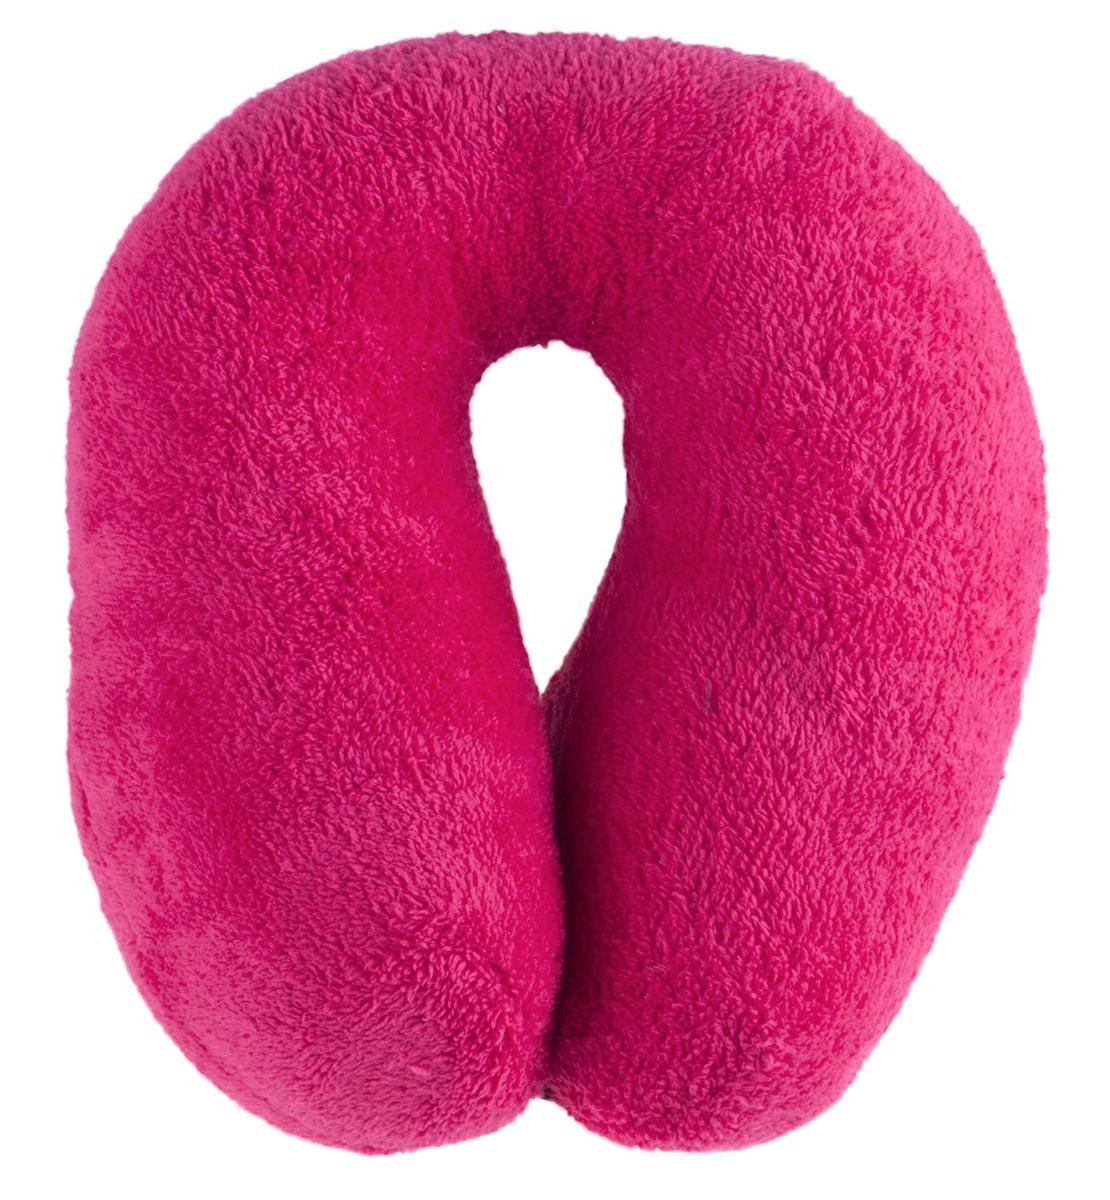 Travel pillow 30796 in Car travel accessories catalogue